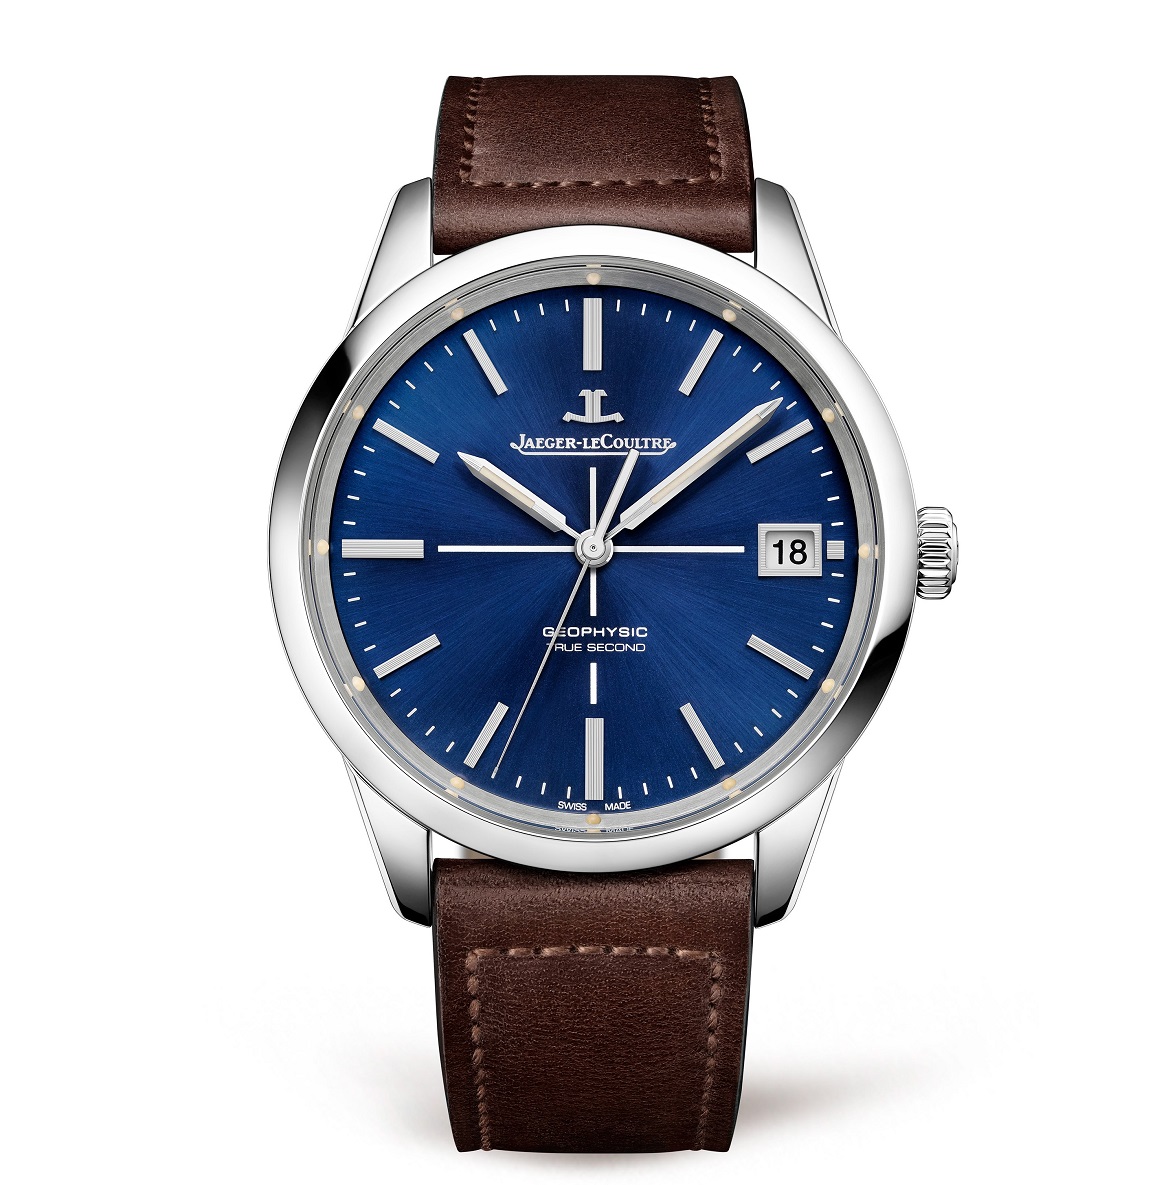 Jaeger-LeCoultre Limited Edition Geophysic True Second Watch